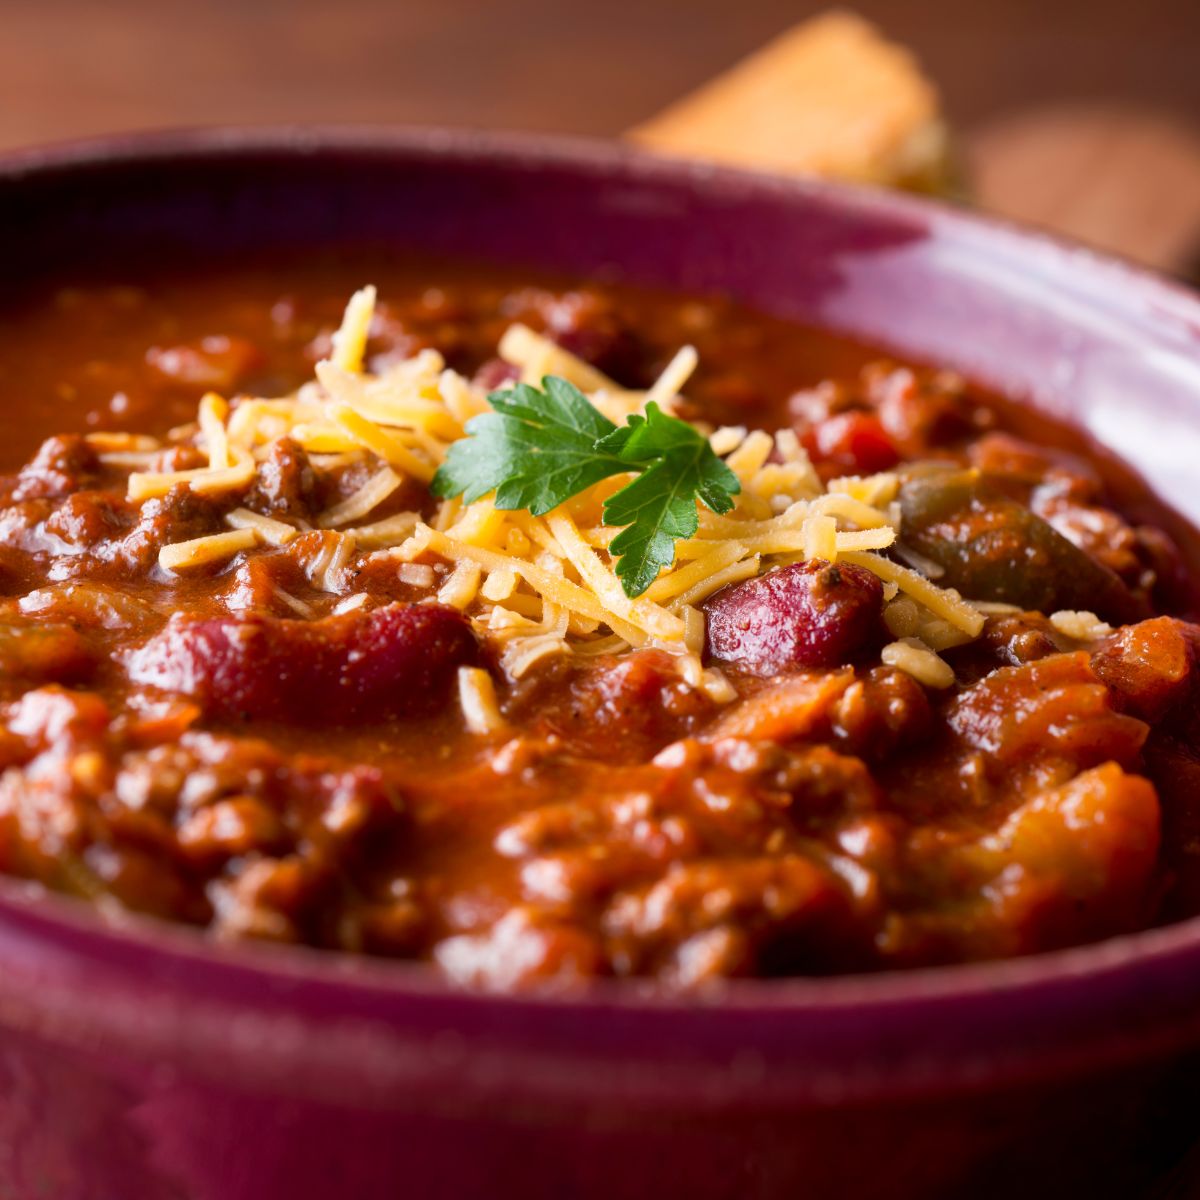 Red bowl of chili